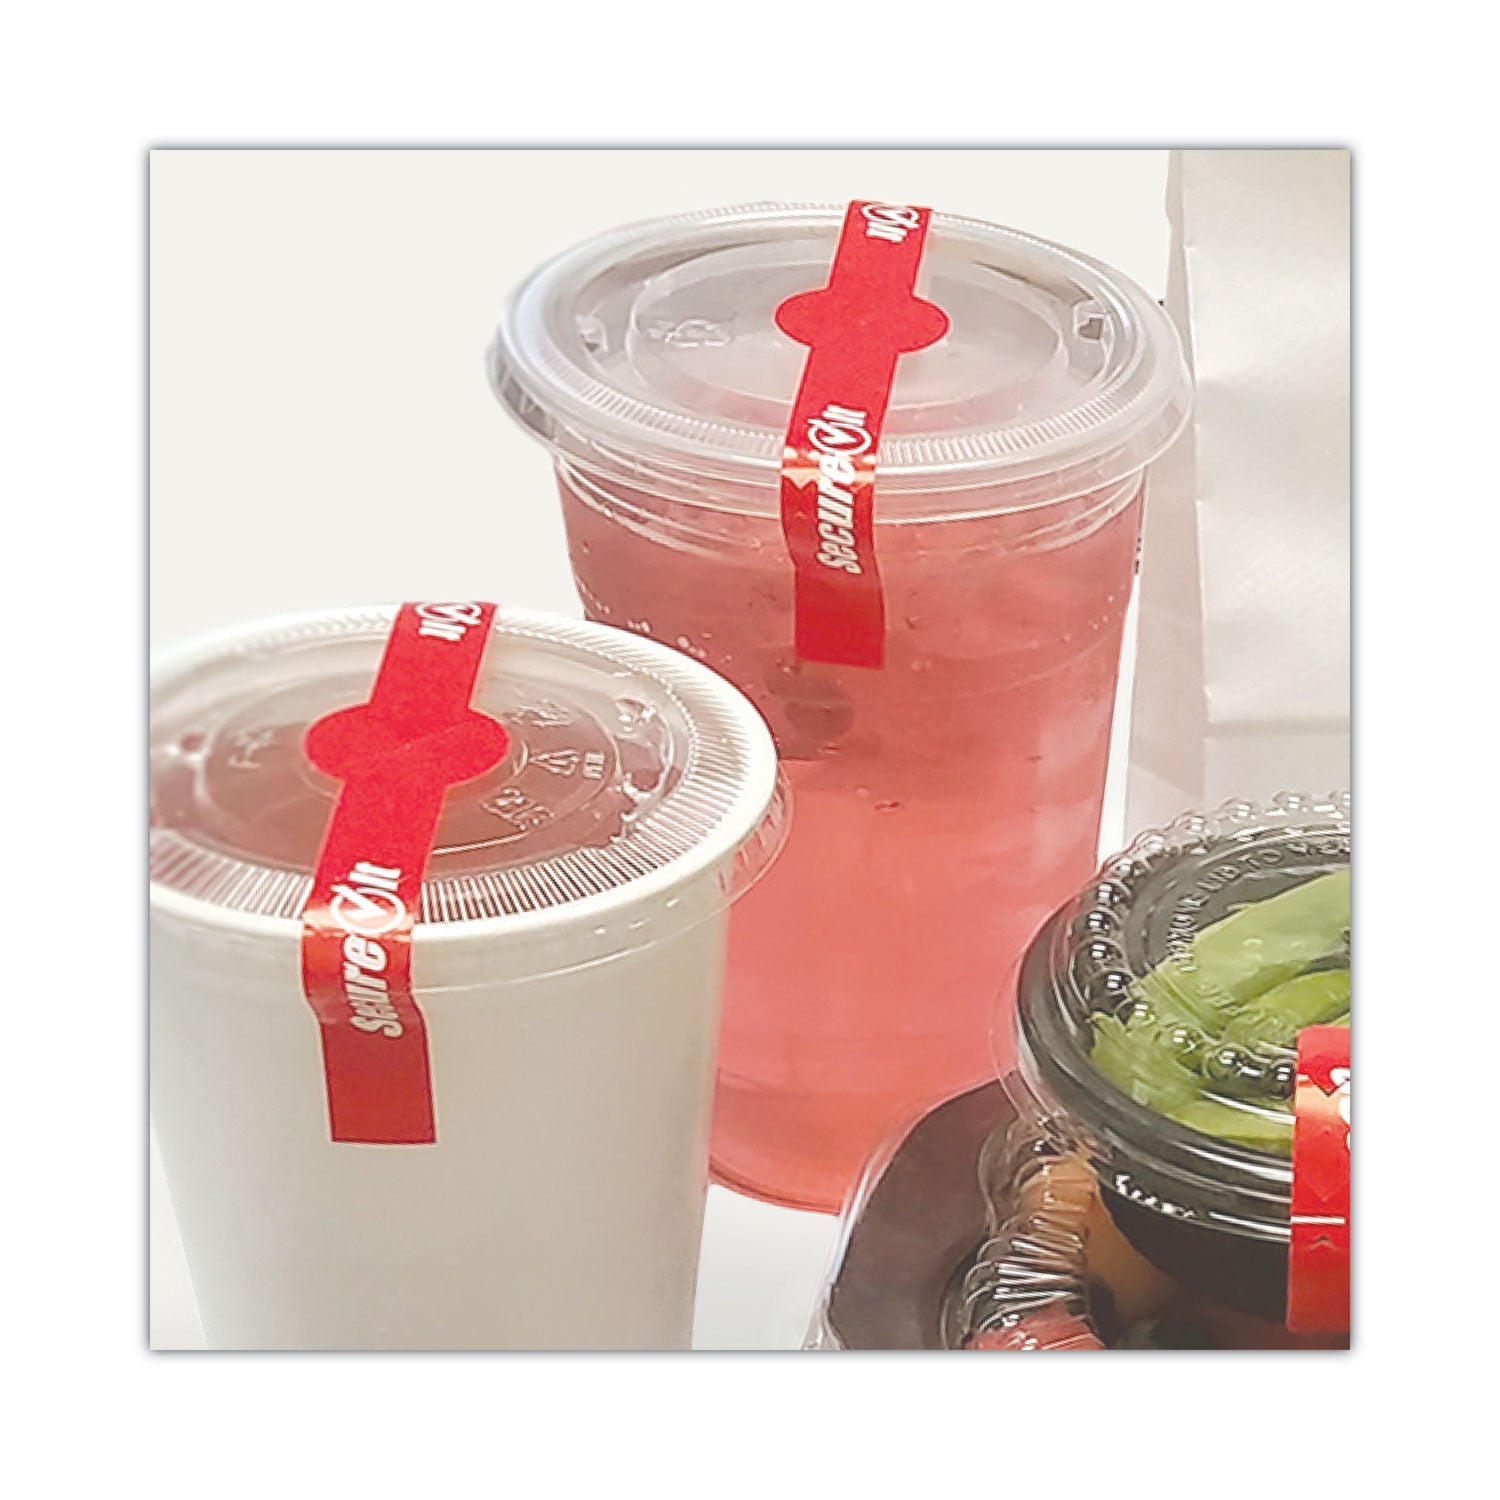 secureit-tamper-evident-food-container-seals-1-x-7-red-paper-250-roll-2-rolls-pack_ntcp17si2 - 1